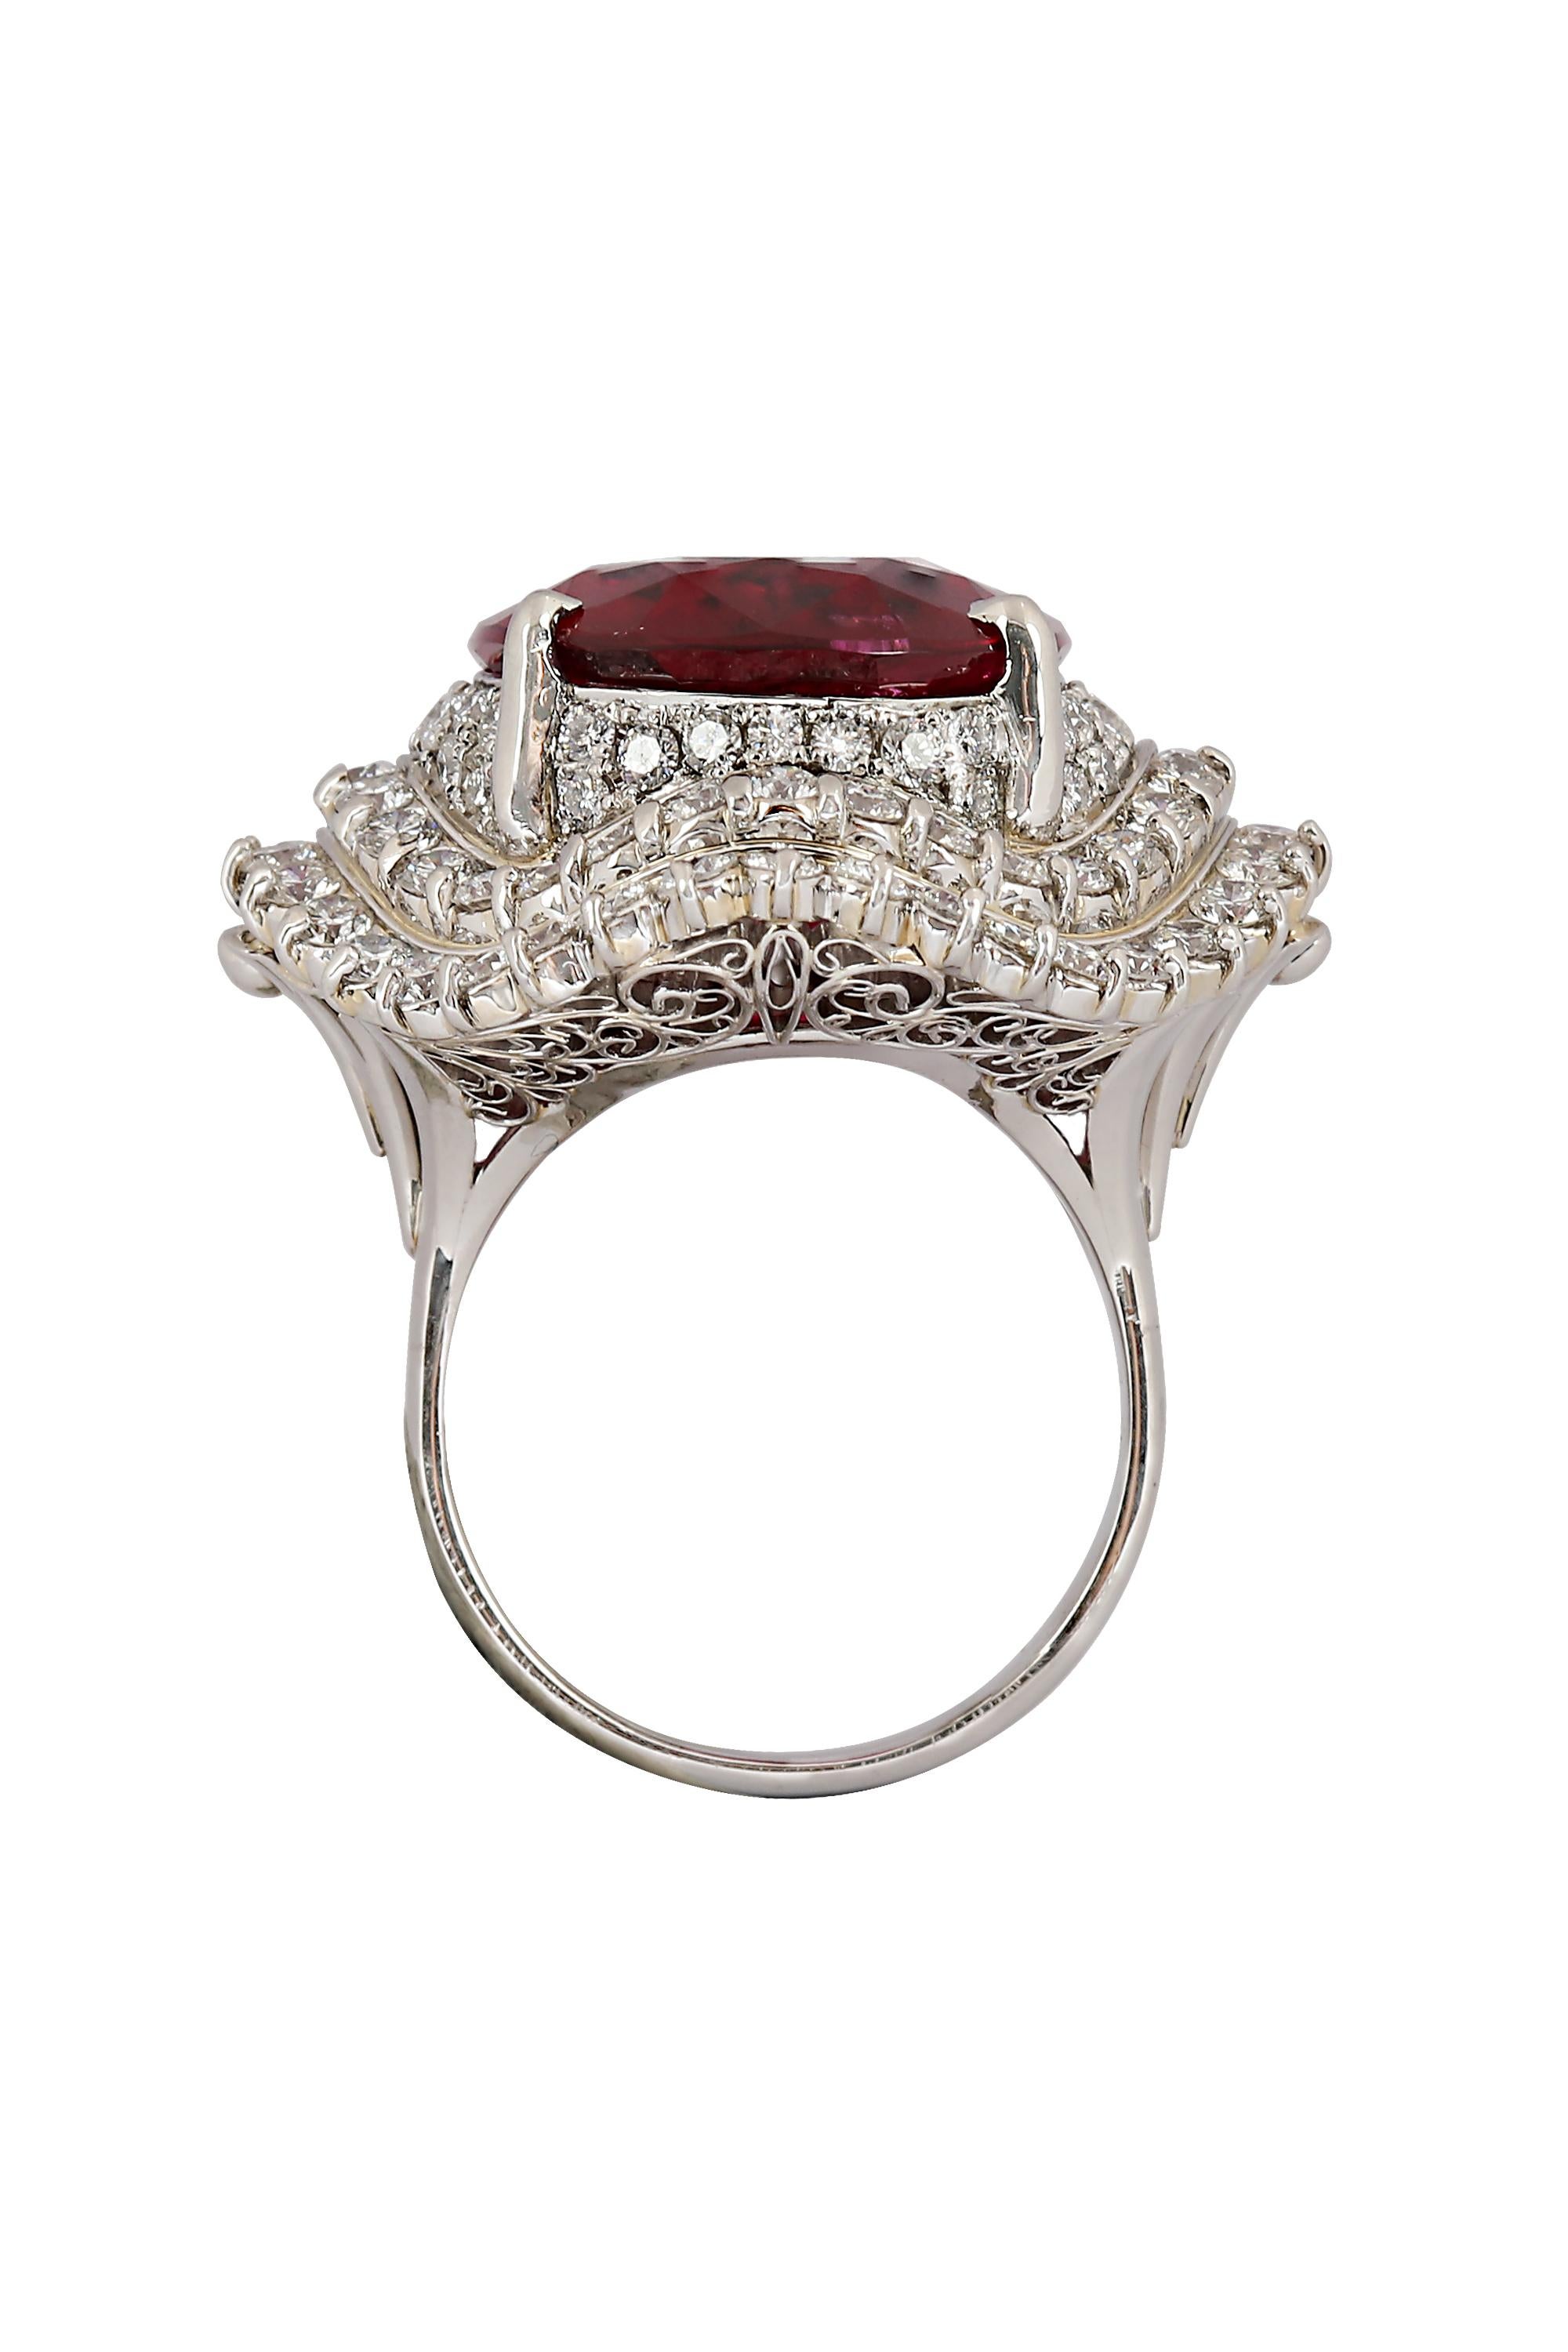 GIA Certified 21.85 Carat Rubellite Diamond Ring In Excellent Condition For Sale In beverly hills, CA